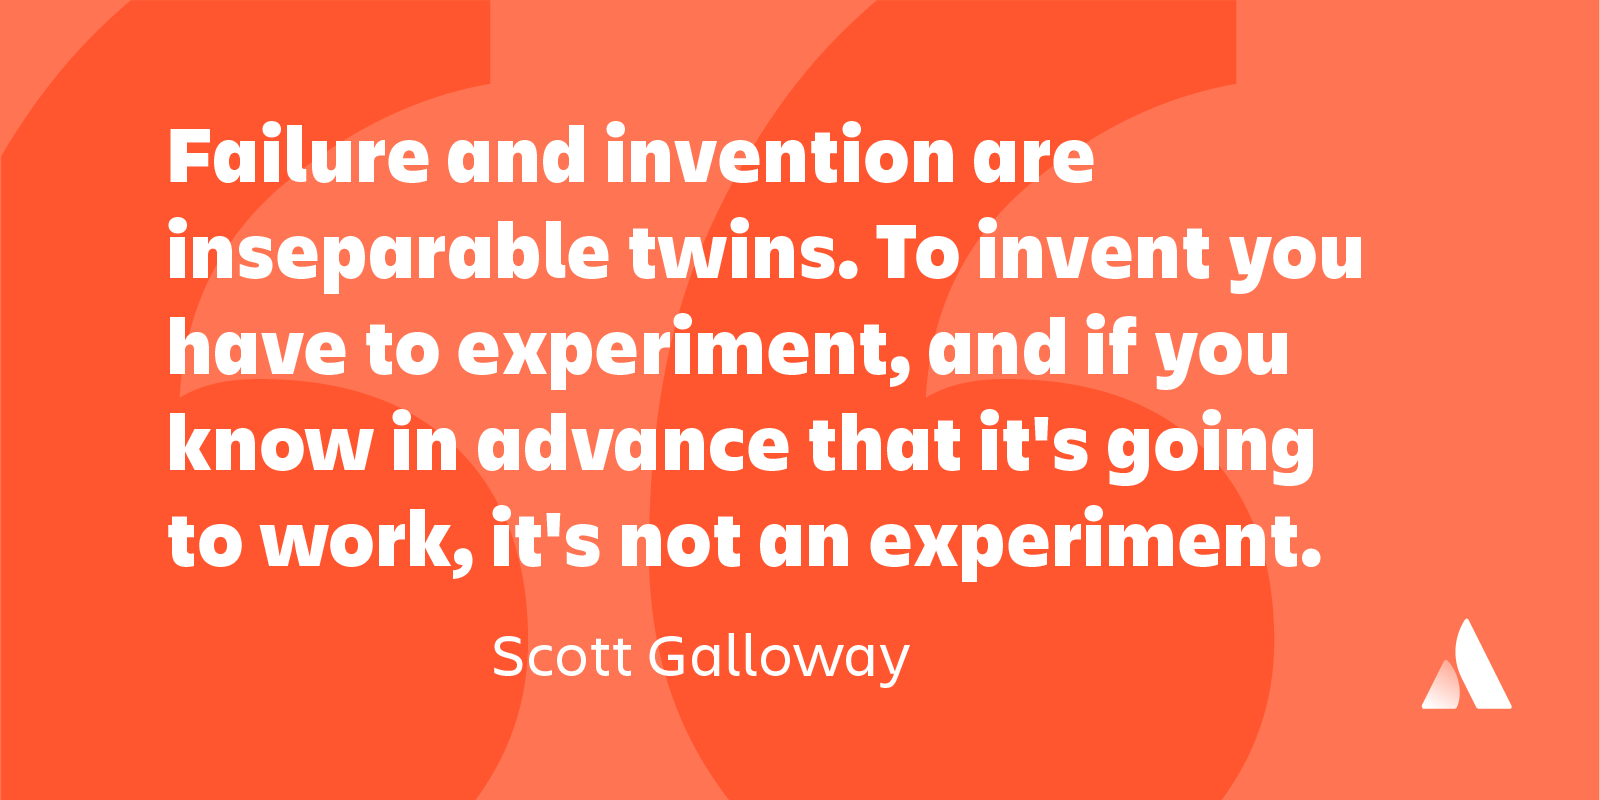 teamwork quote Failure and invention are inseparable twins. To invent you have to experiment, and if you know in advance that it's going to work, it's not an experiment